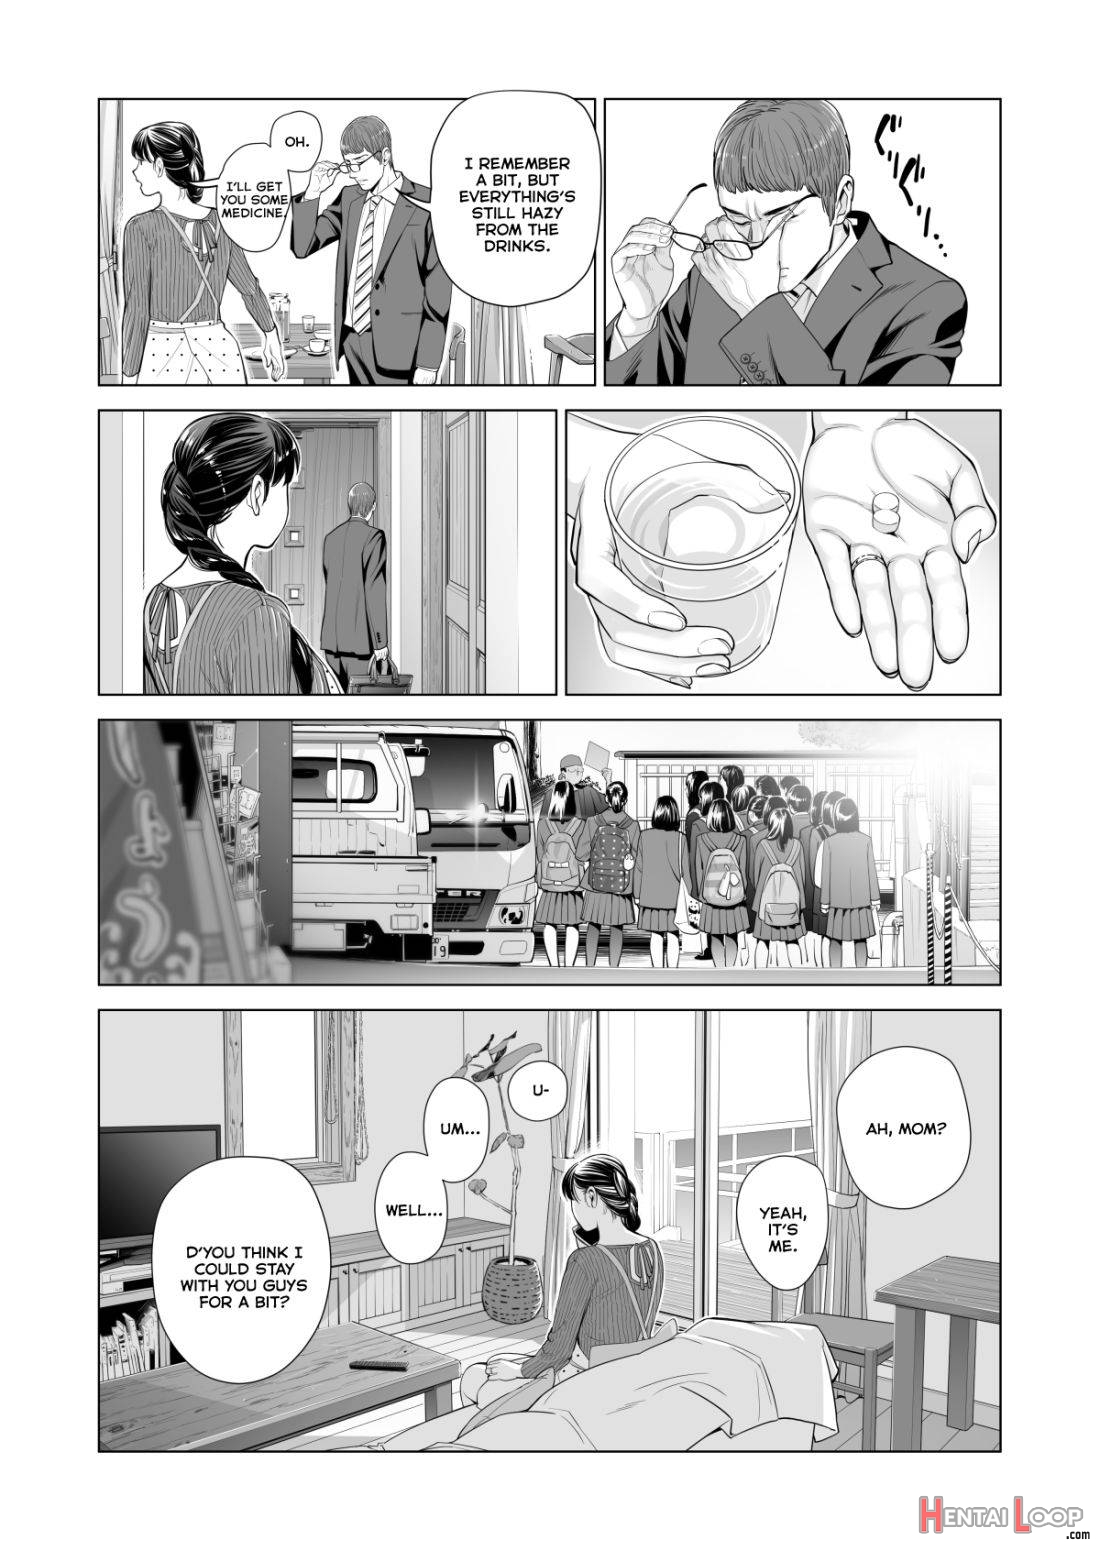 Tsukiyo no Midare Zake (Kouhen) Moonlit Intoxication ~ A Housewife Stolen by a Coworker Besides her Blackout Drunk Husband ~ Chapter 2 page 7